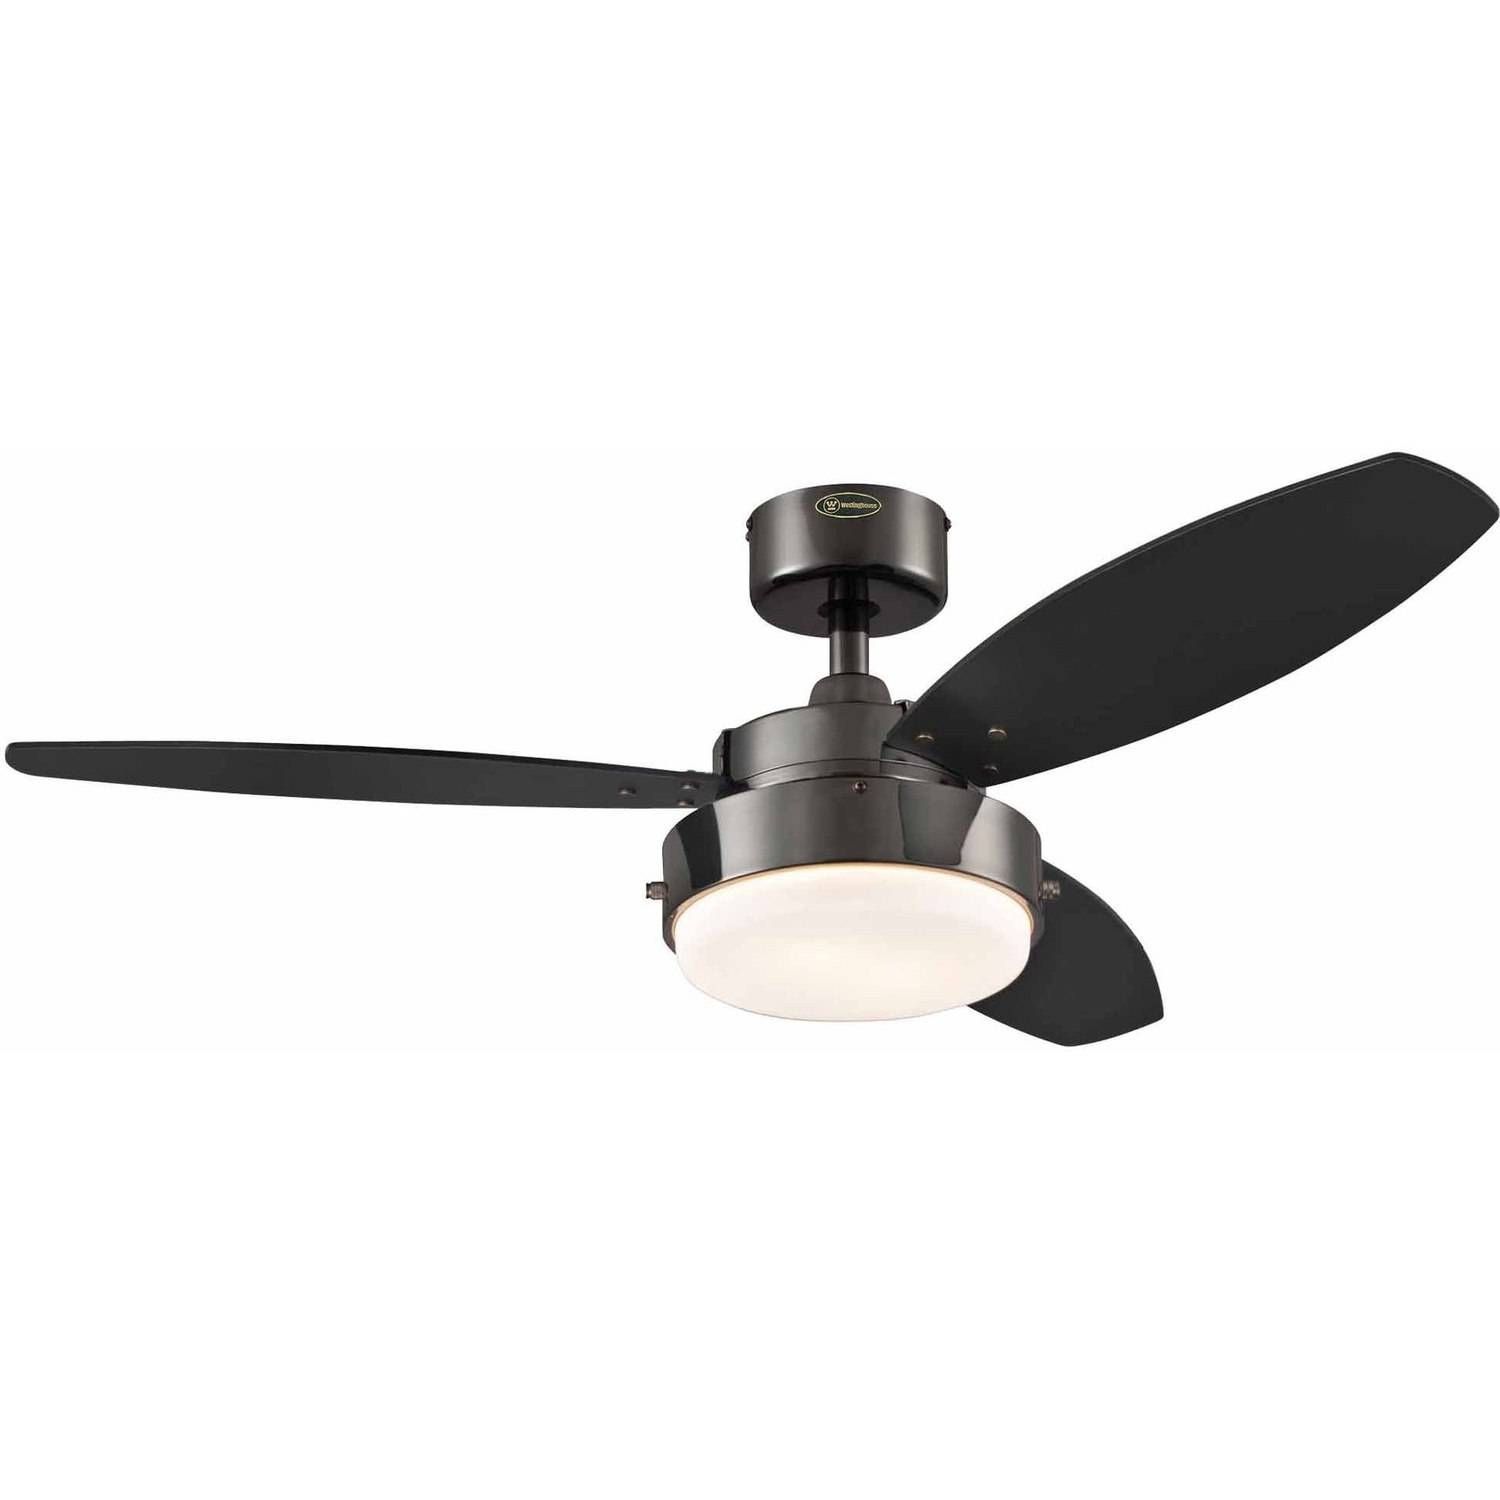 15 Best Ideas of Outdoor Ceiling Fan Lights With Remote ...